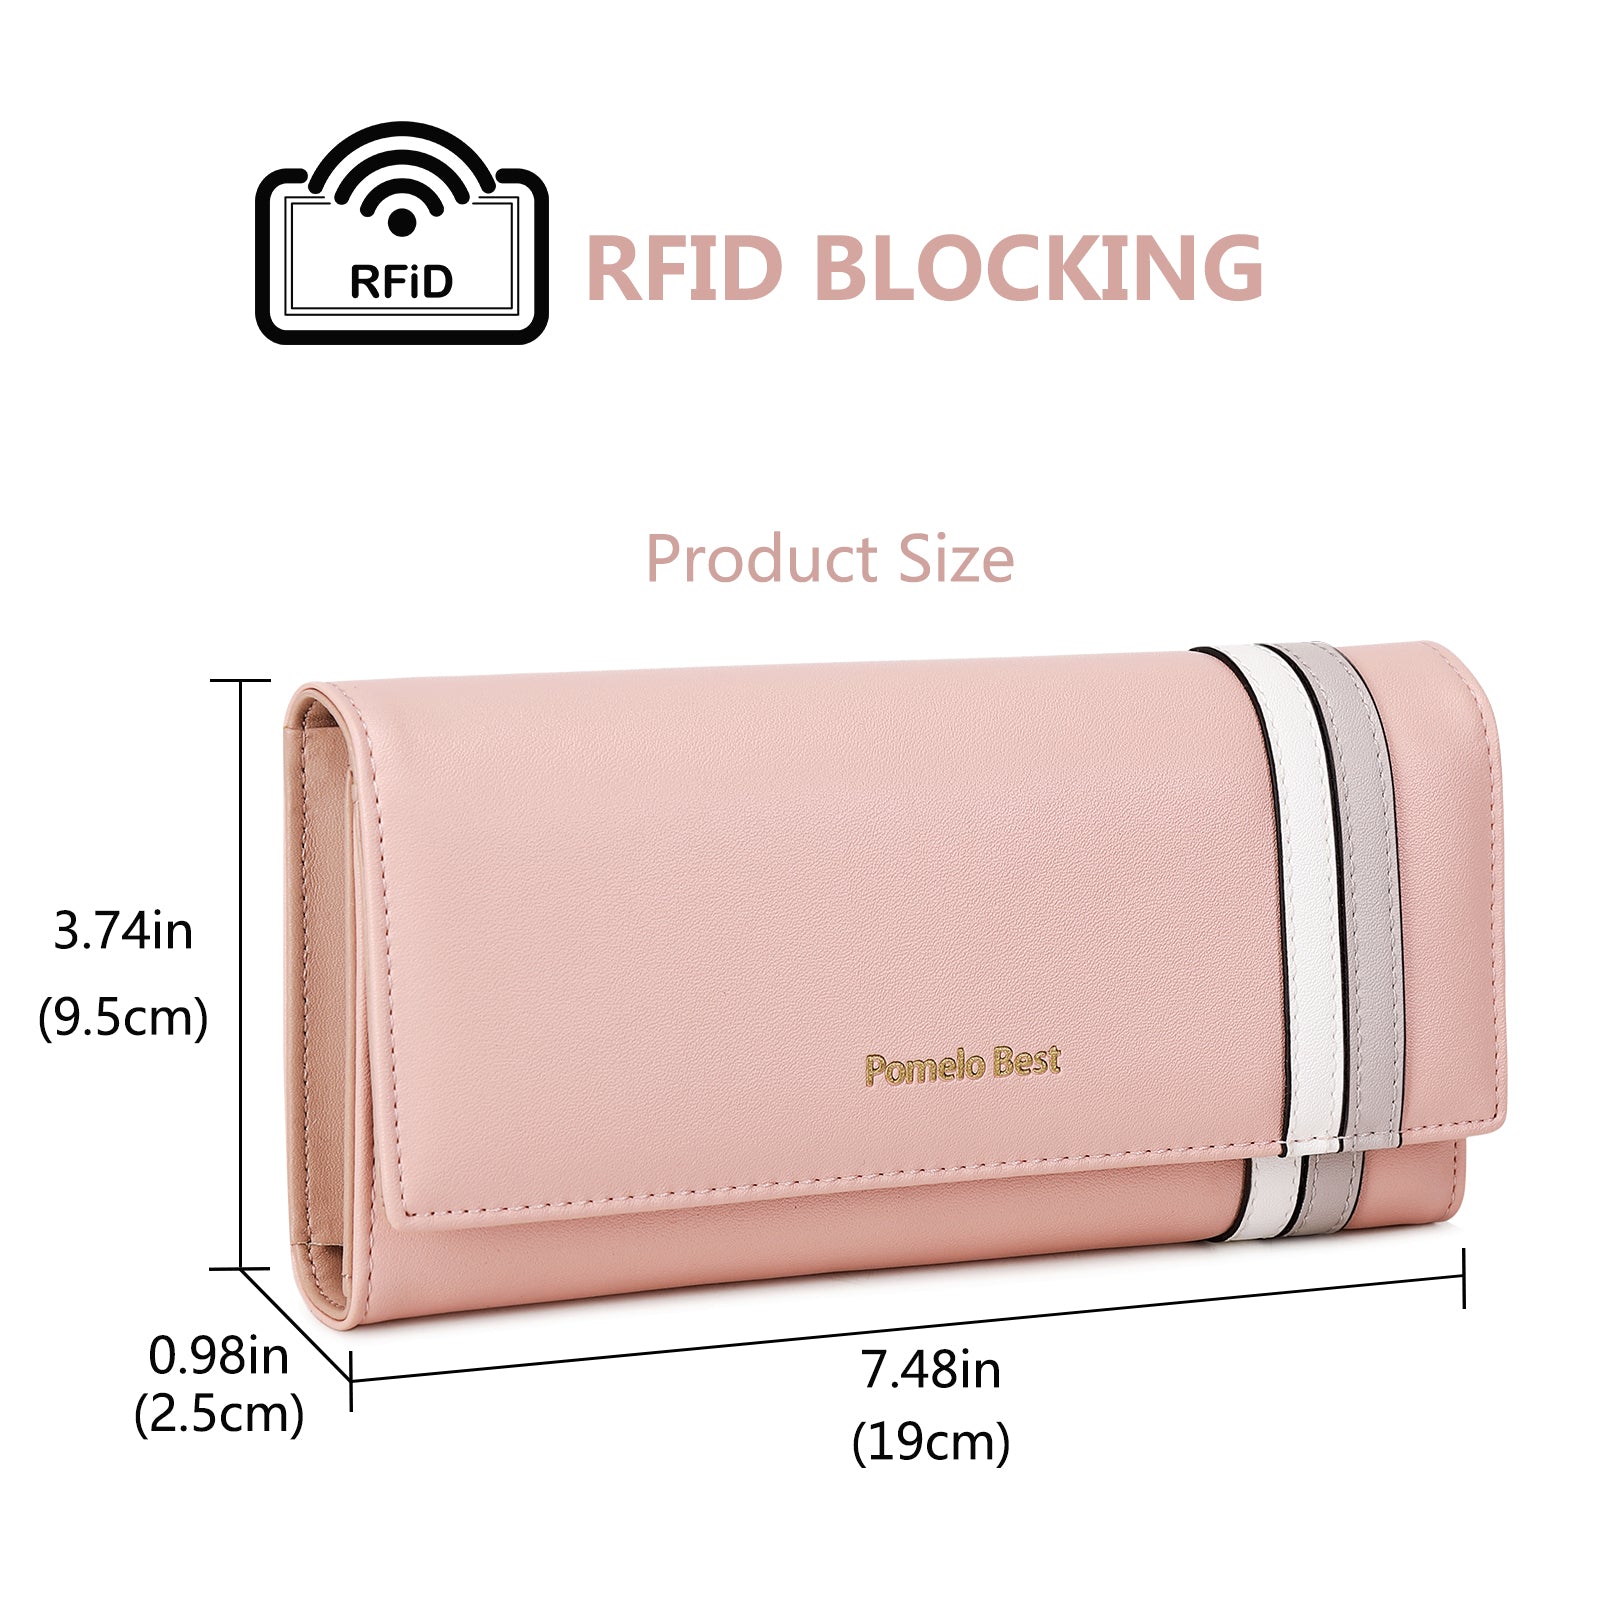 Pomelo Best Women's Wallet Large PU Leather RFID Blocking Purse for Women with Many Card Slots and Coin Pocket (Pink)